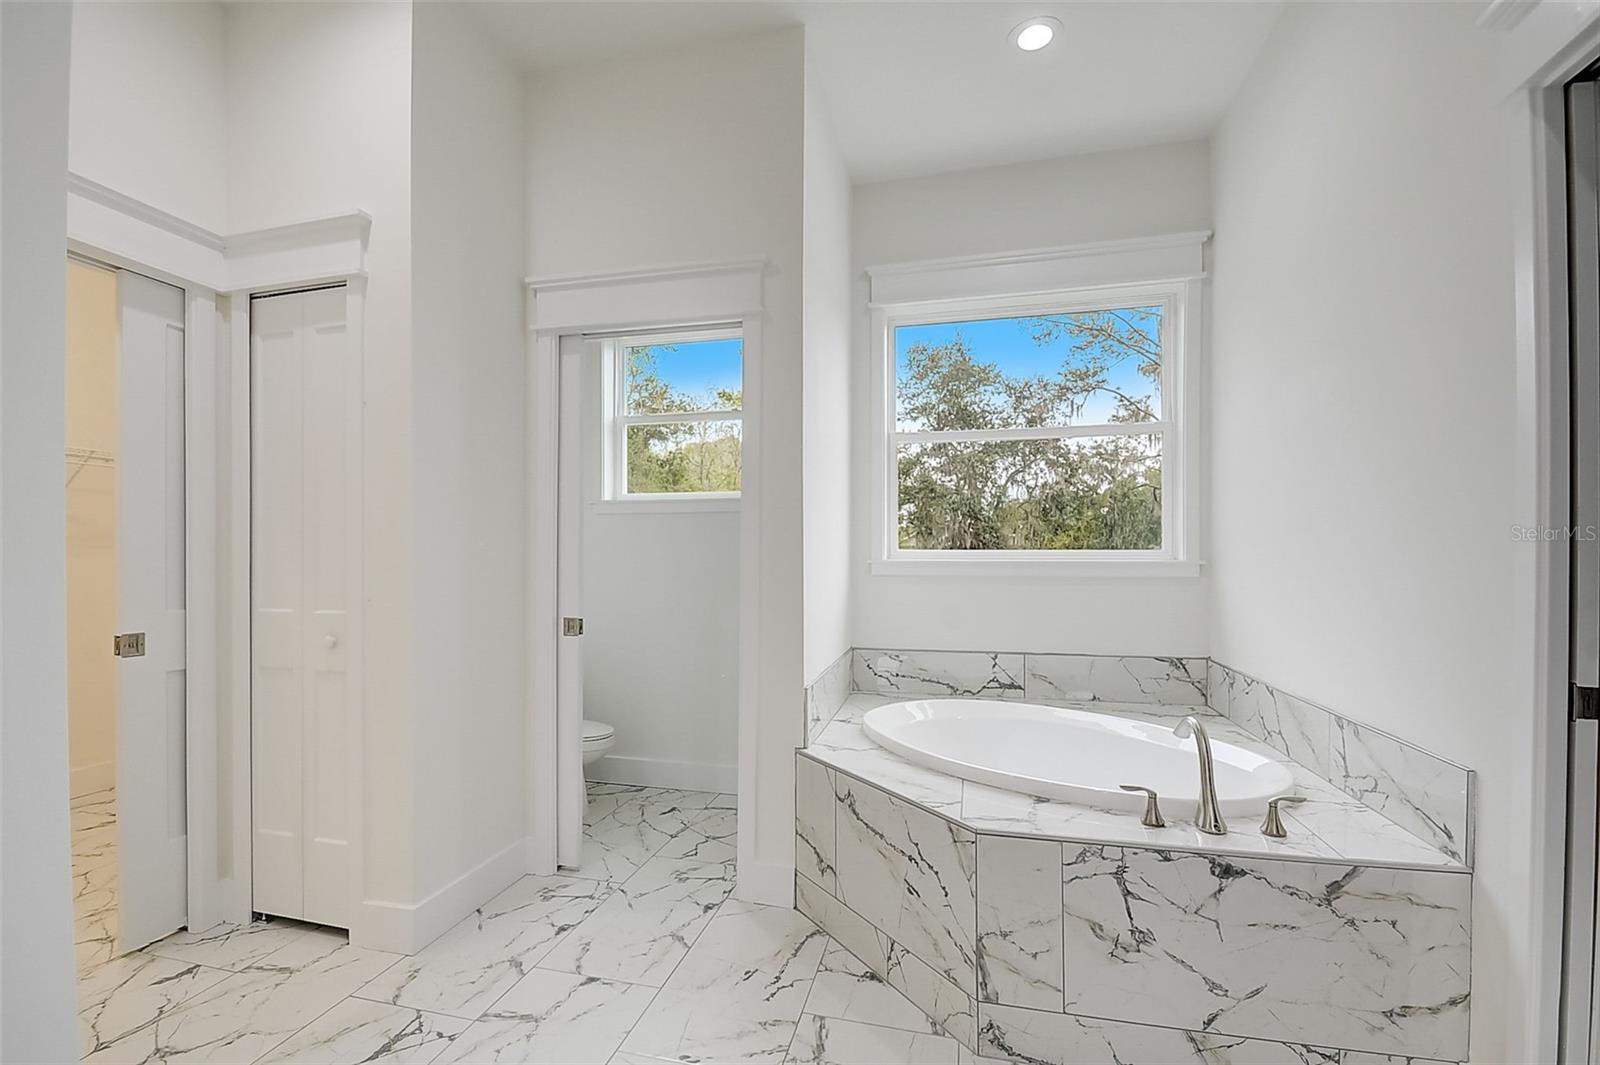 Master Bathroom - Garden Tub and Commode